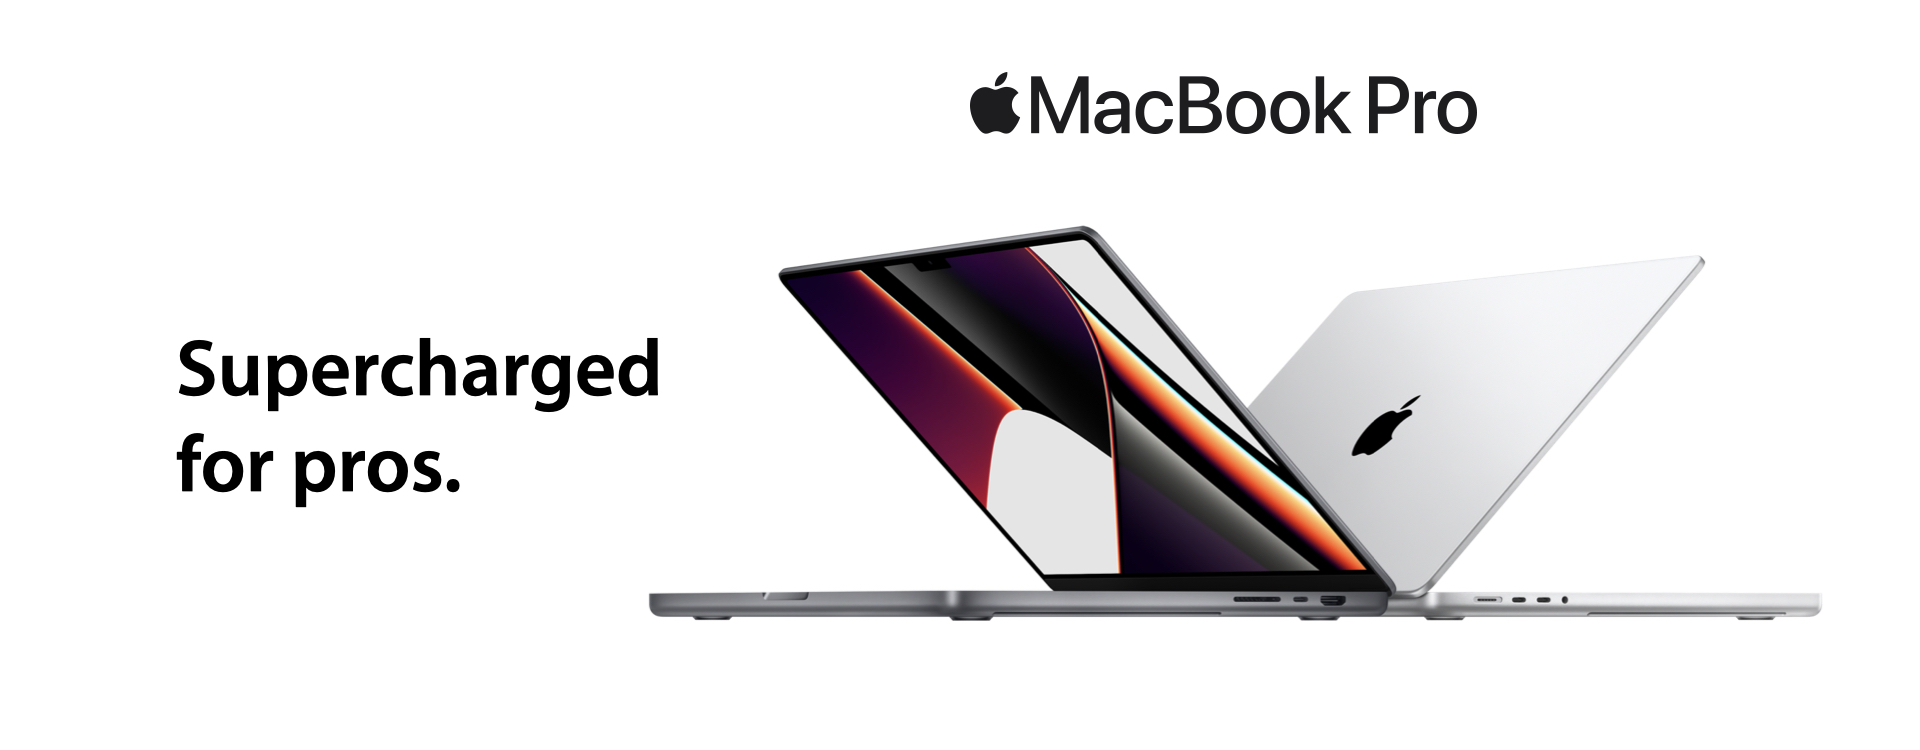 MacBook Pro. Supercharged for pros.